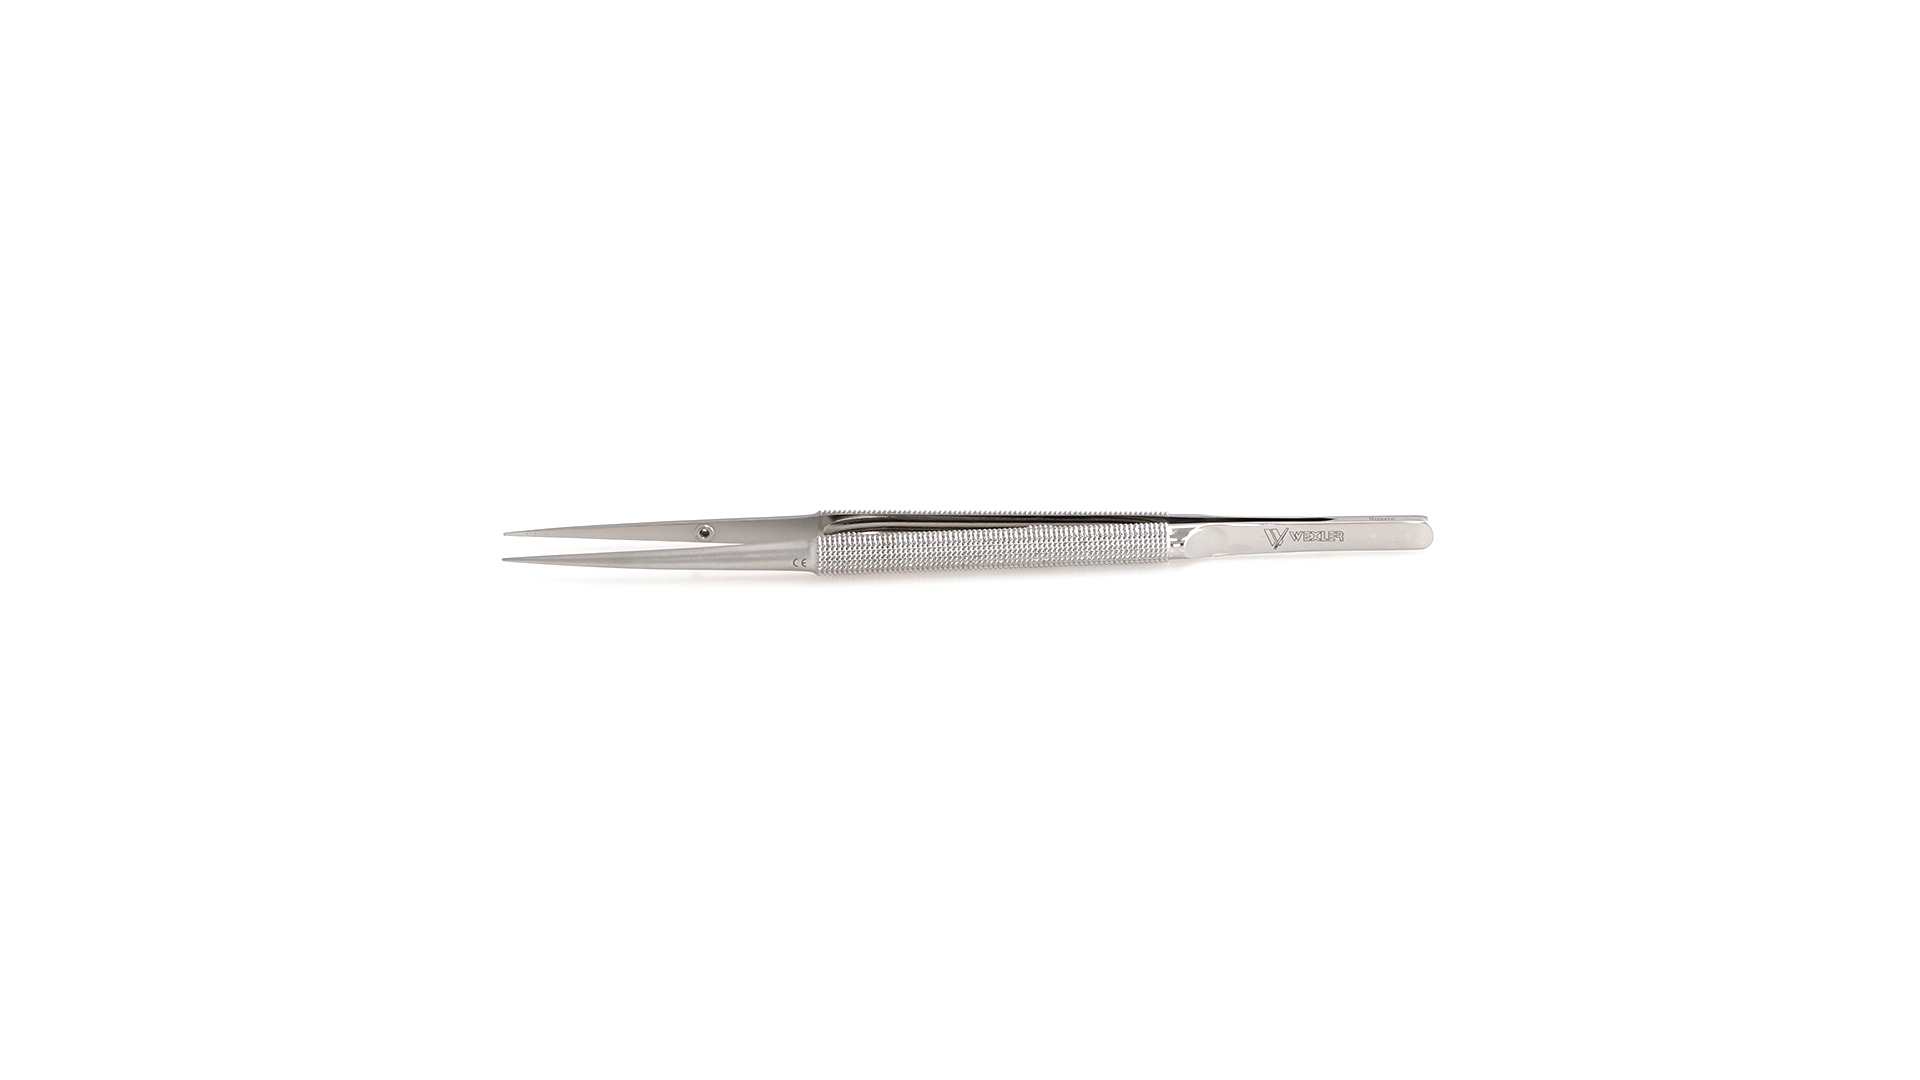 Micro Forceps - Straight TC coated 0.5mm tips